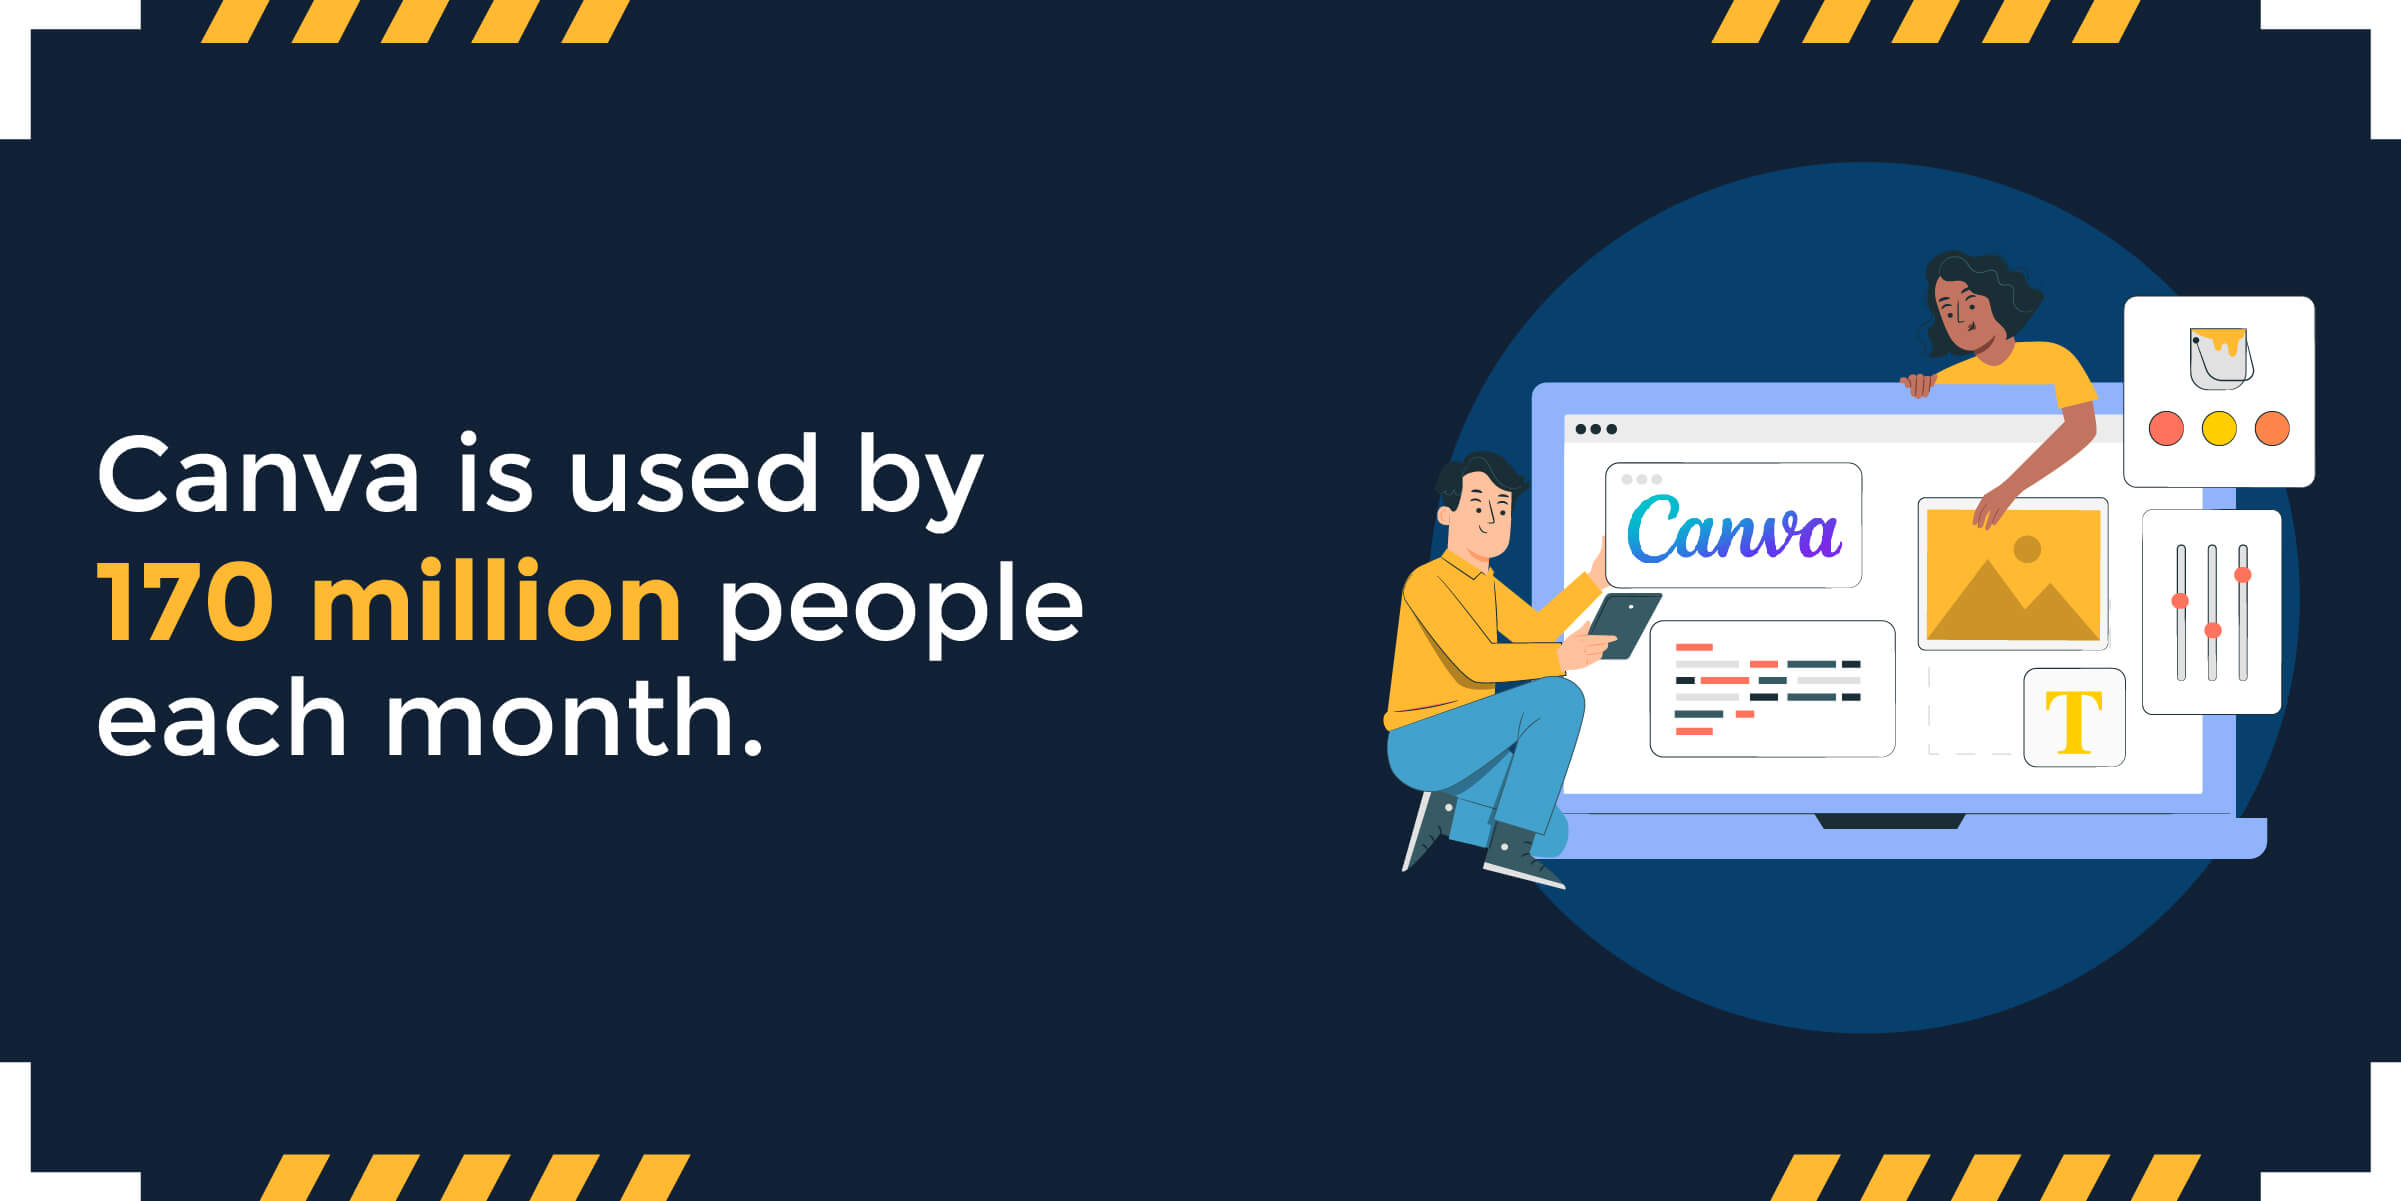 canva is used by 170 million